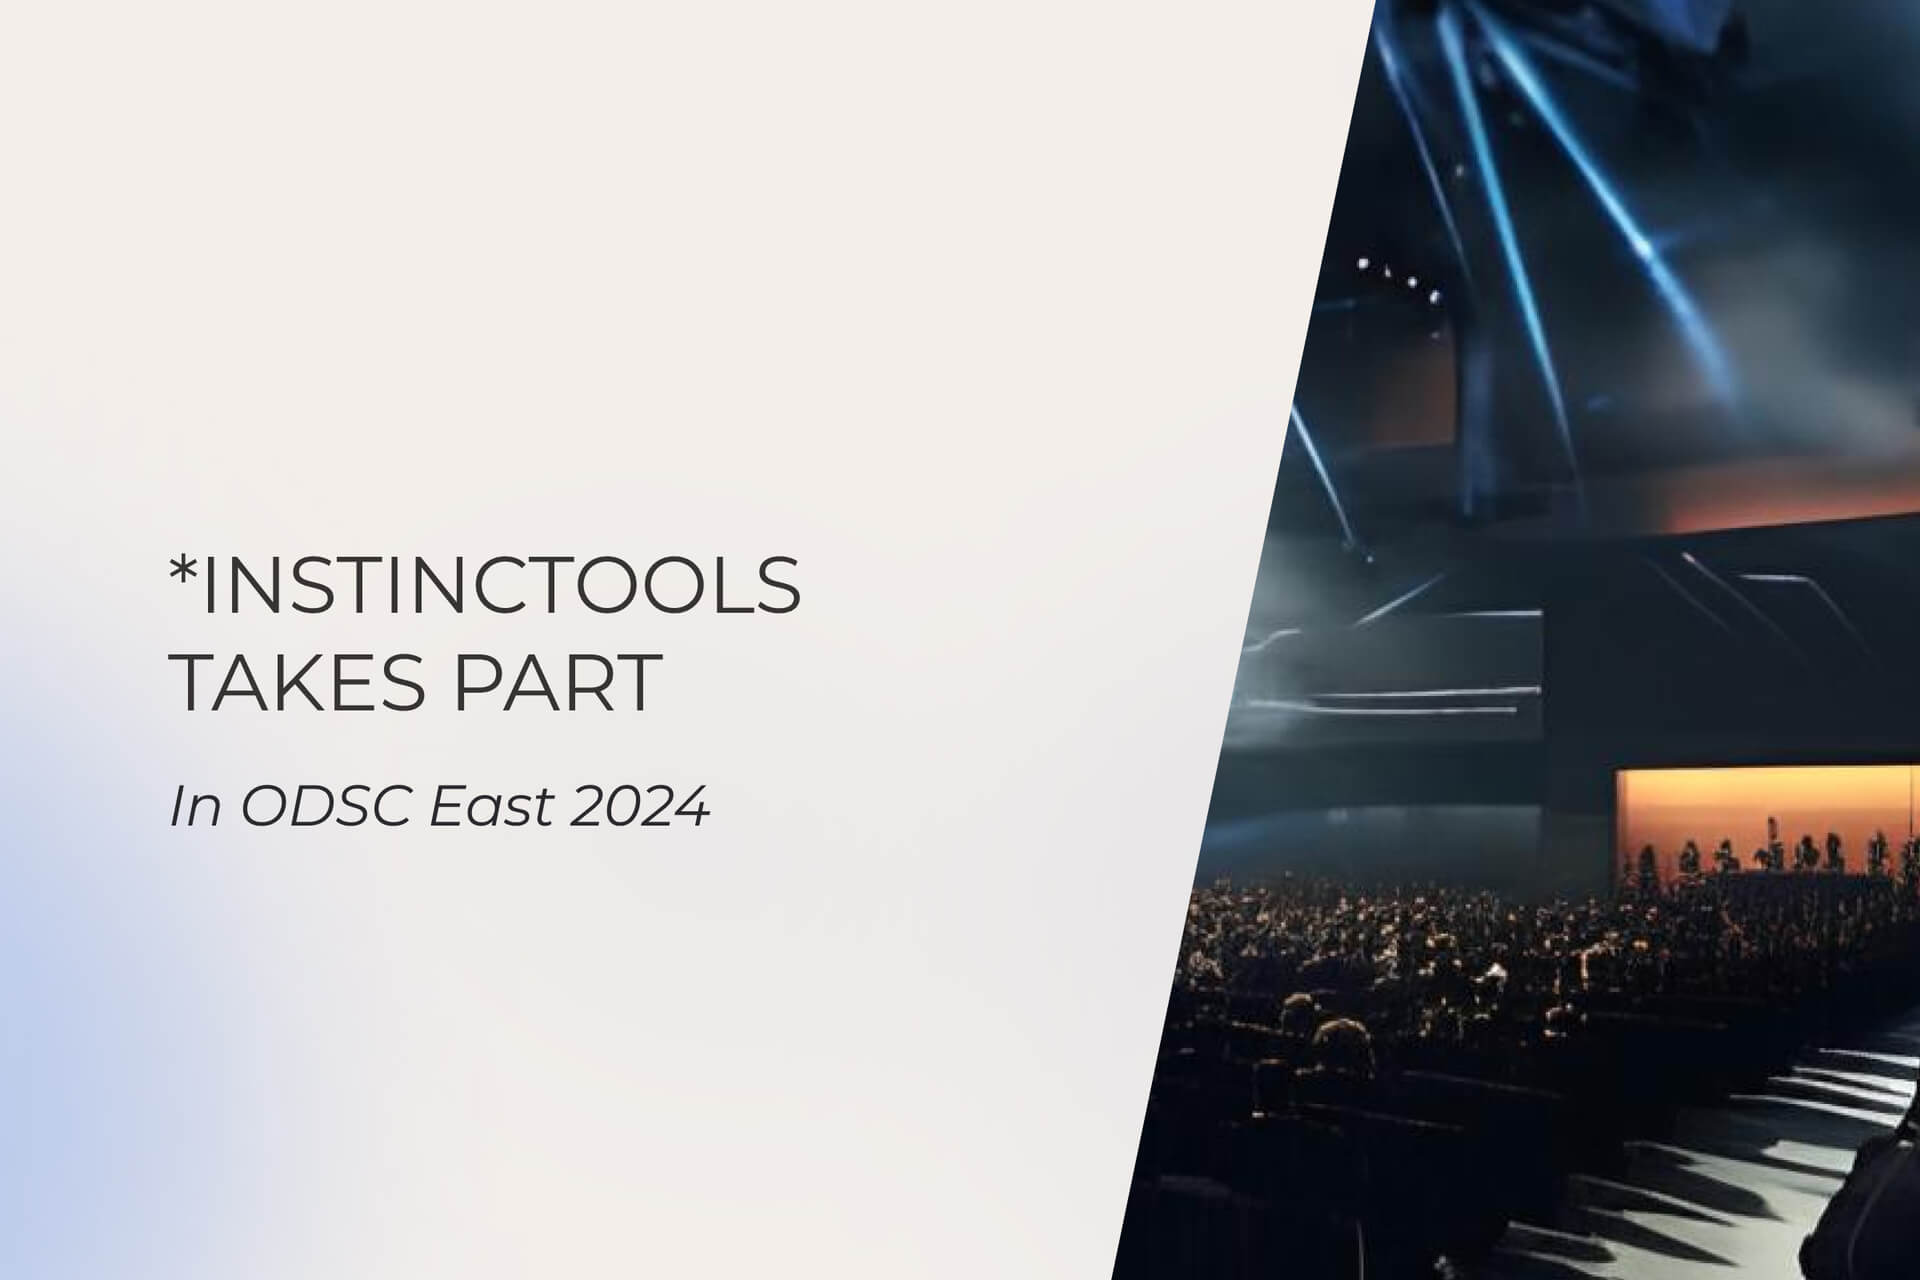 Instinctools Takes Part In ODSC East 2024